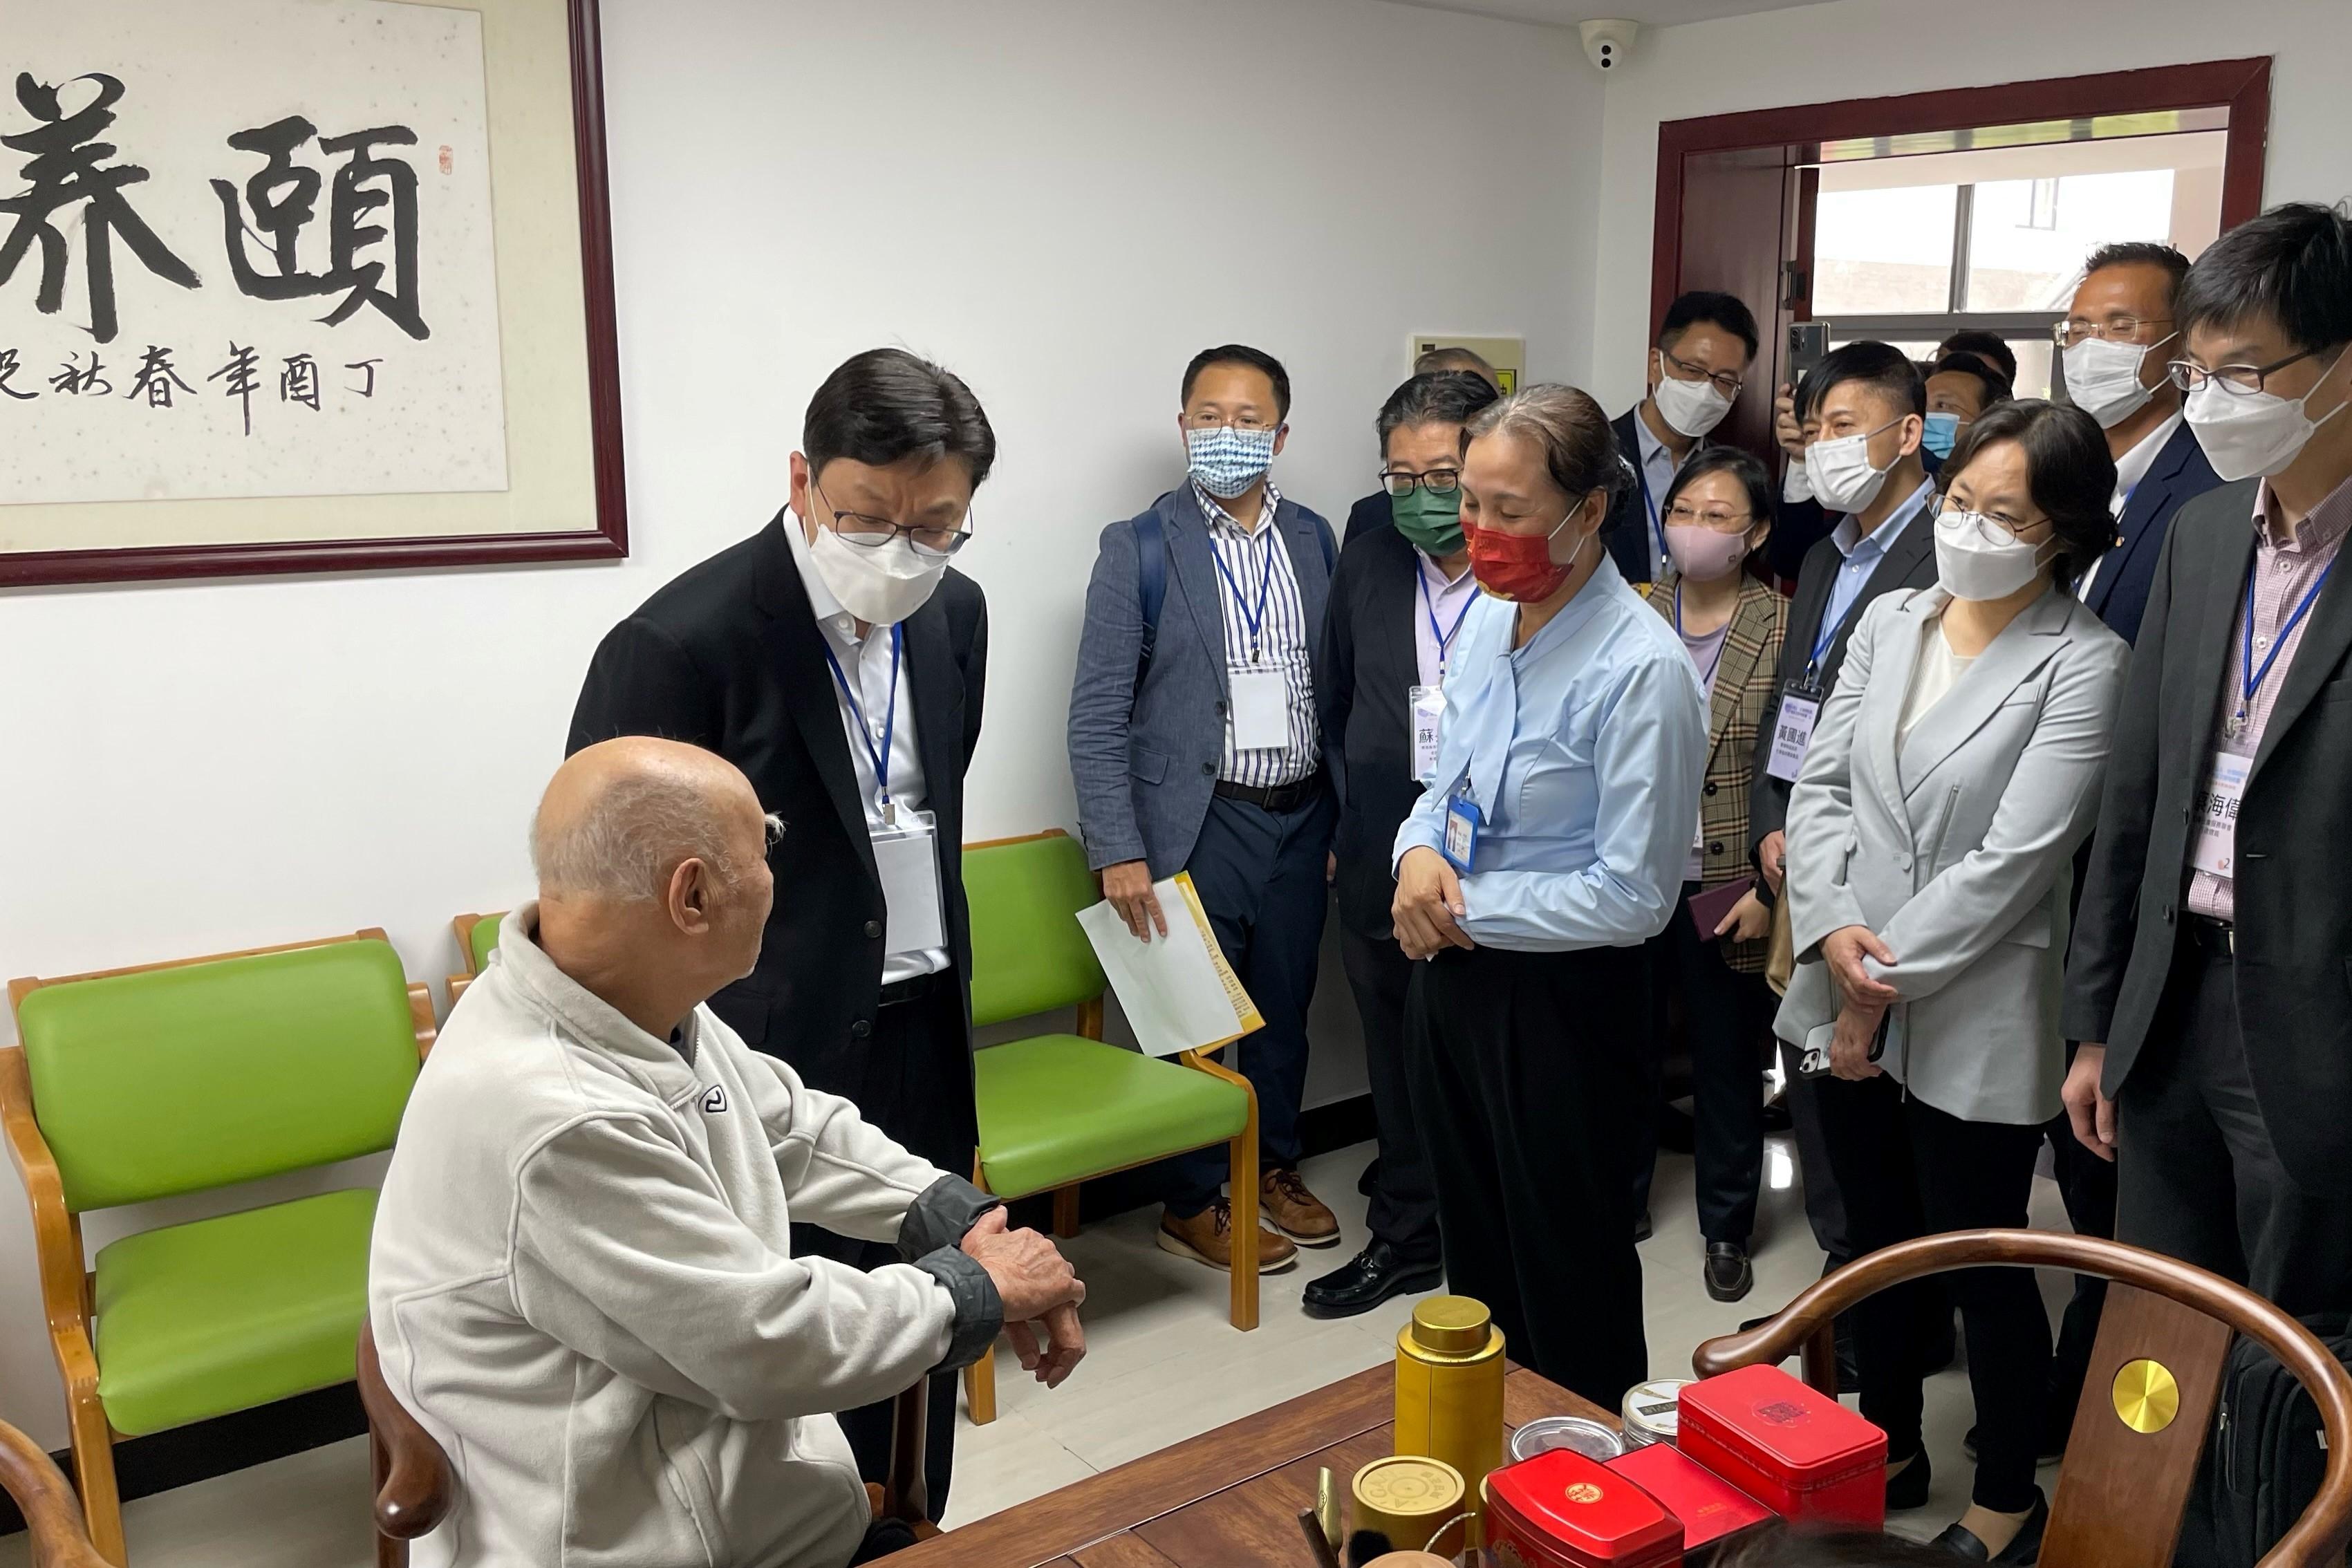 The Secretary for Labour and Welfare, Mr Chris Sun, led the Hong Kong social welfare sector delegation on a visit to Guangdong and visited a residential care home for the elderly in Nansha District of Guangzhou Municipality yesterday afternoon (April 25). Photo shows Mr Sun (second left) extending warm wishes to a resident from Hong Kong.